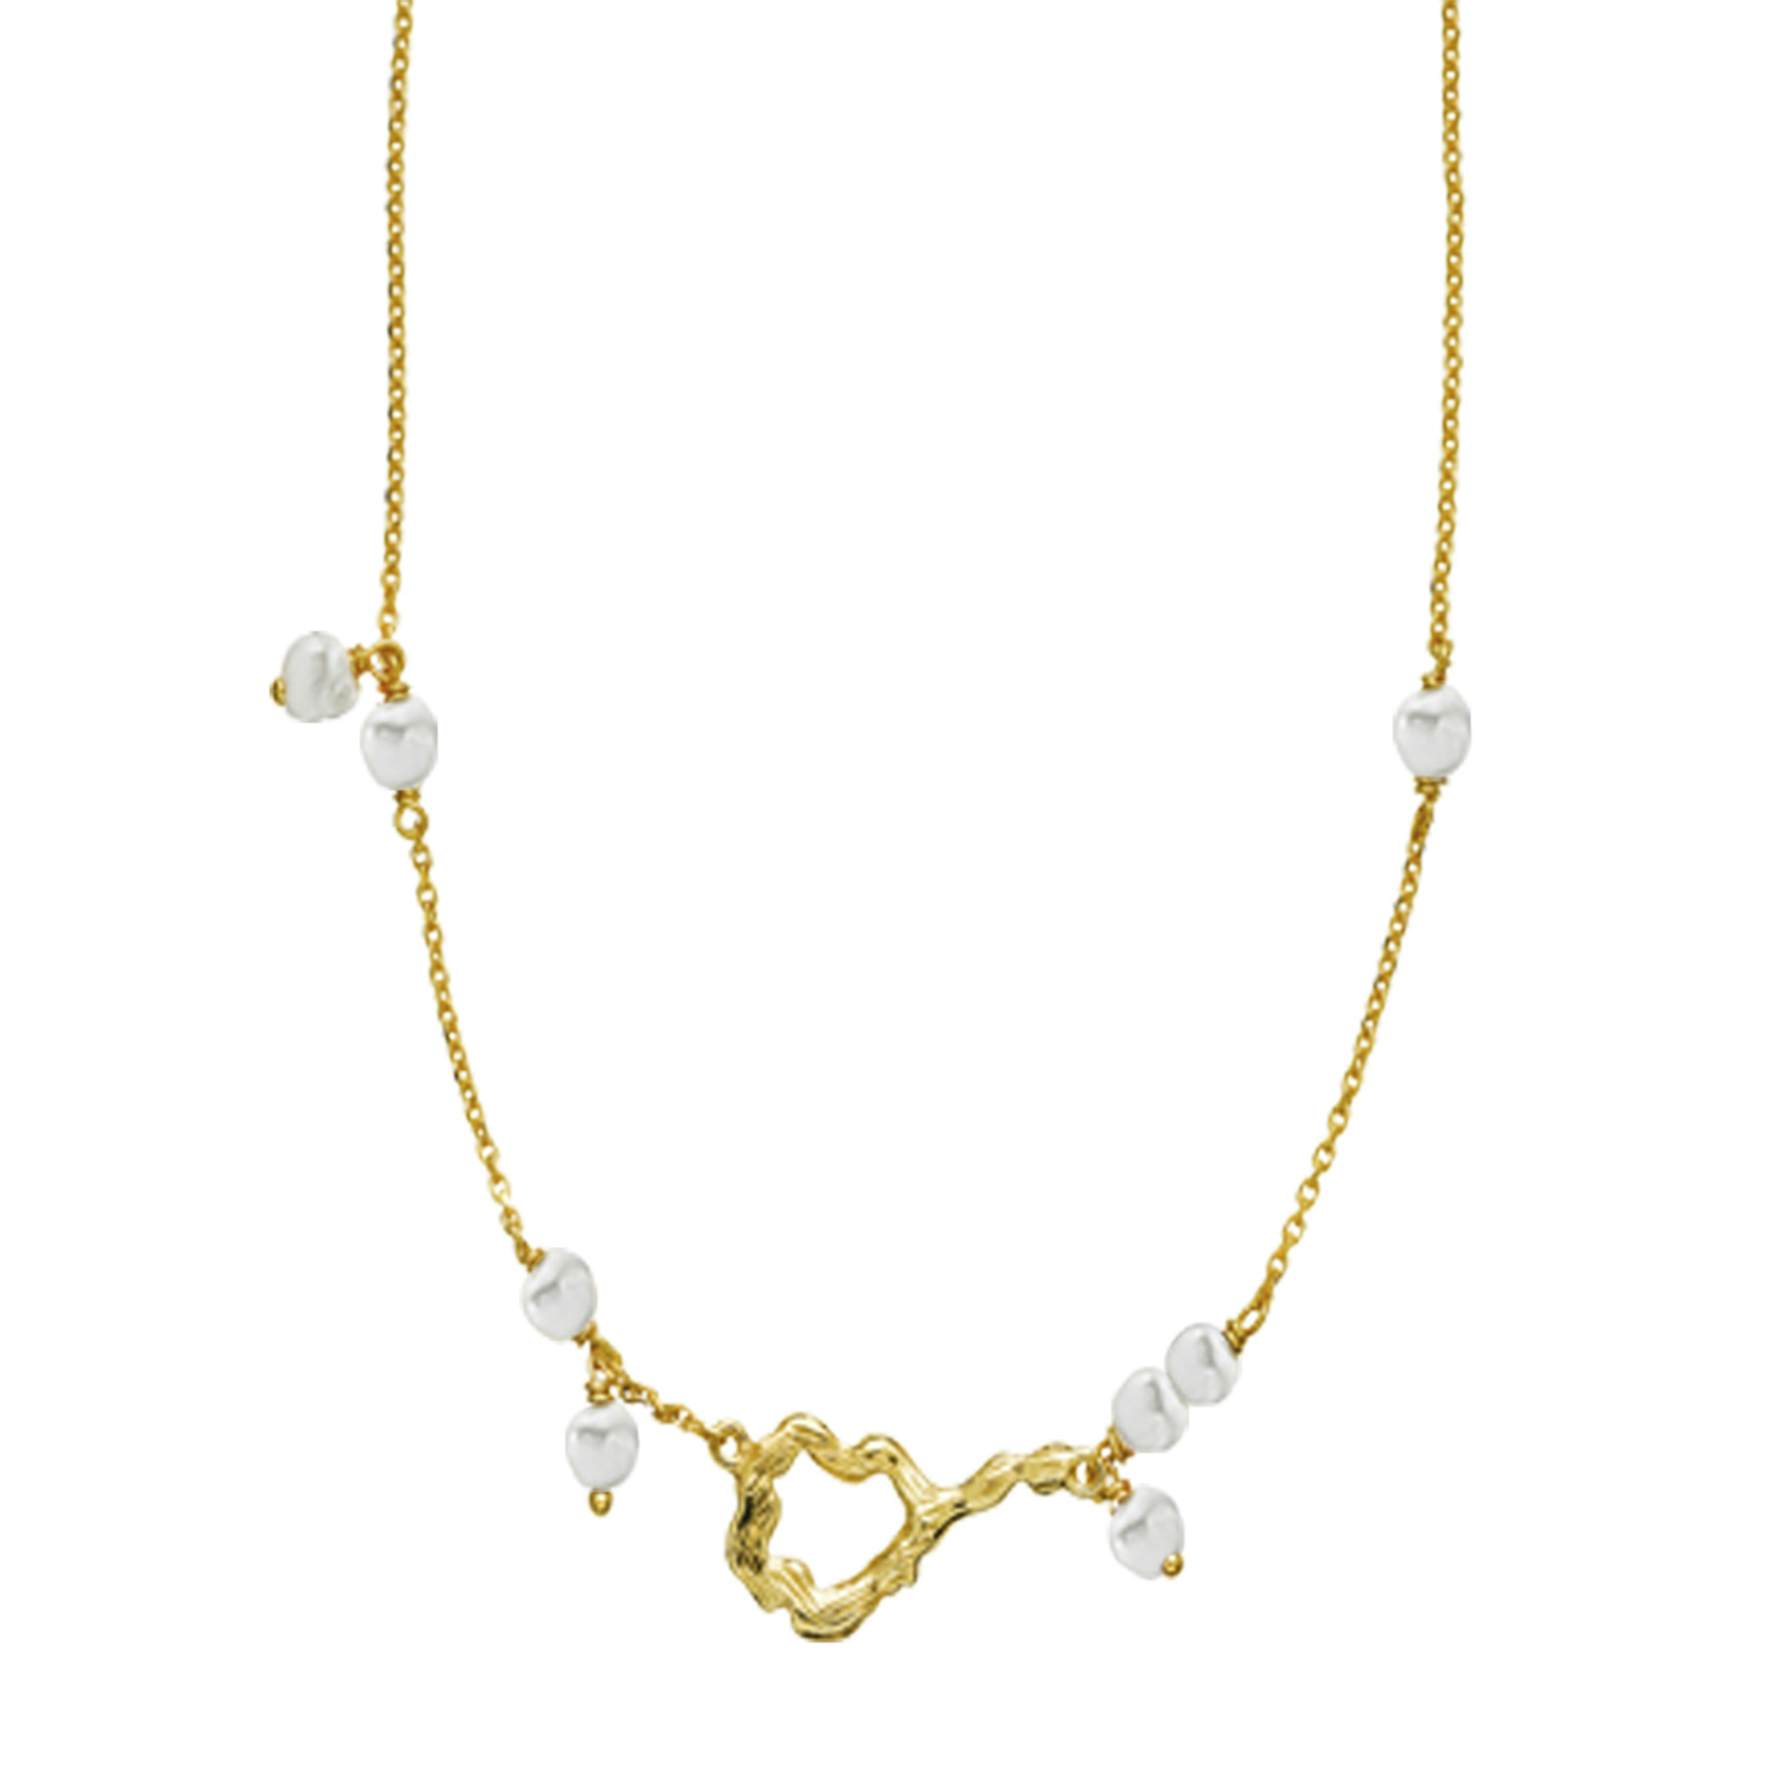 Lærke Bentsen By Sistie Necklace With Pearls from Sistie in Goldplated-Silver Sterling 925|Freshwater Pearl